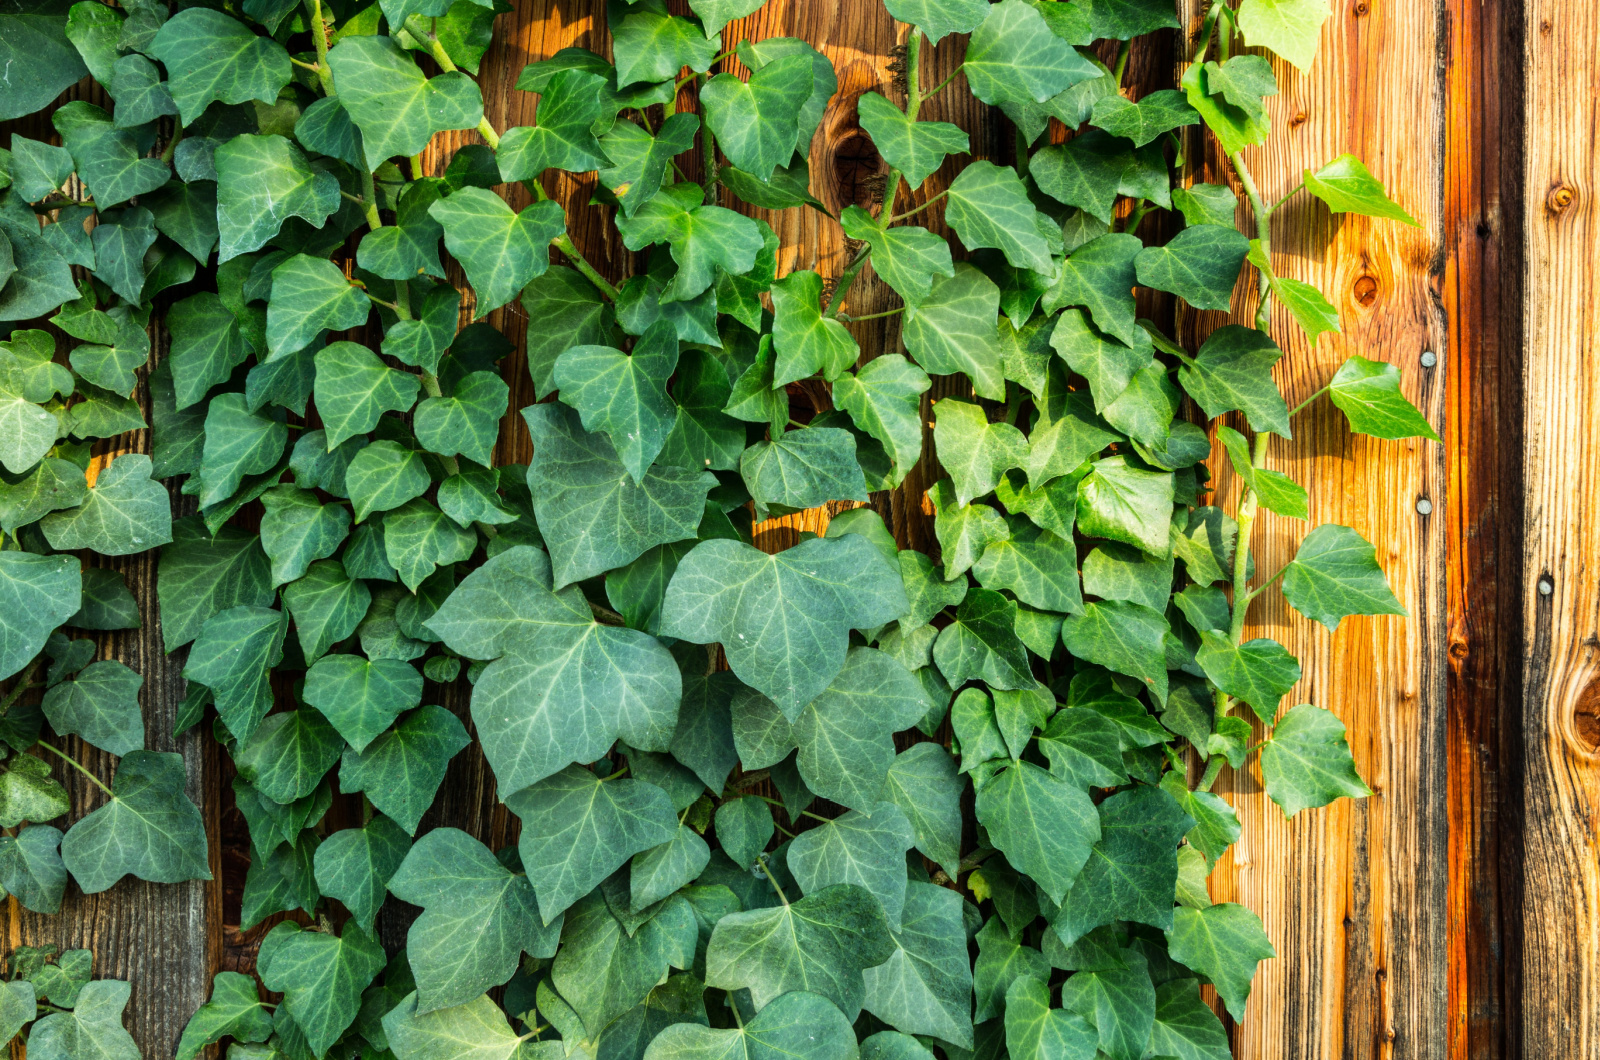 English Ivy on wooden fence